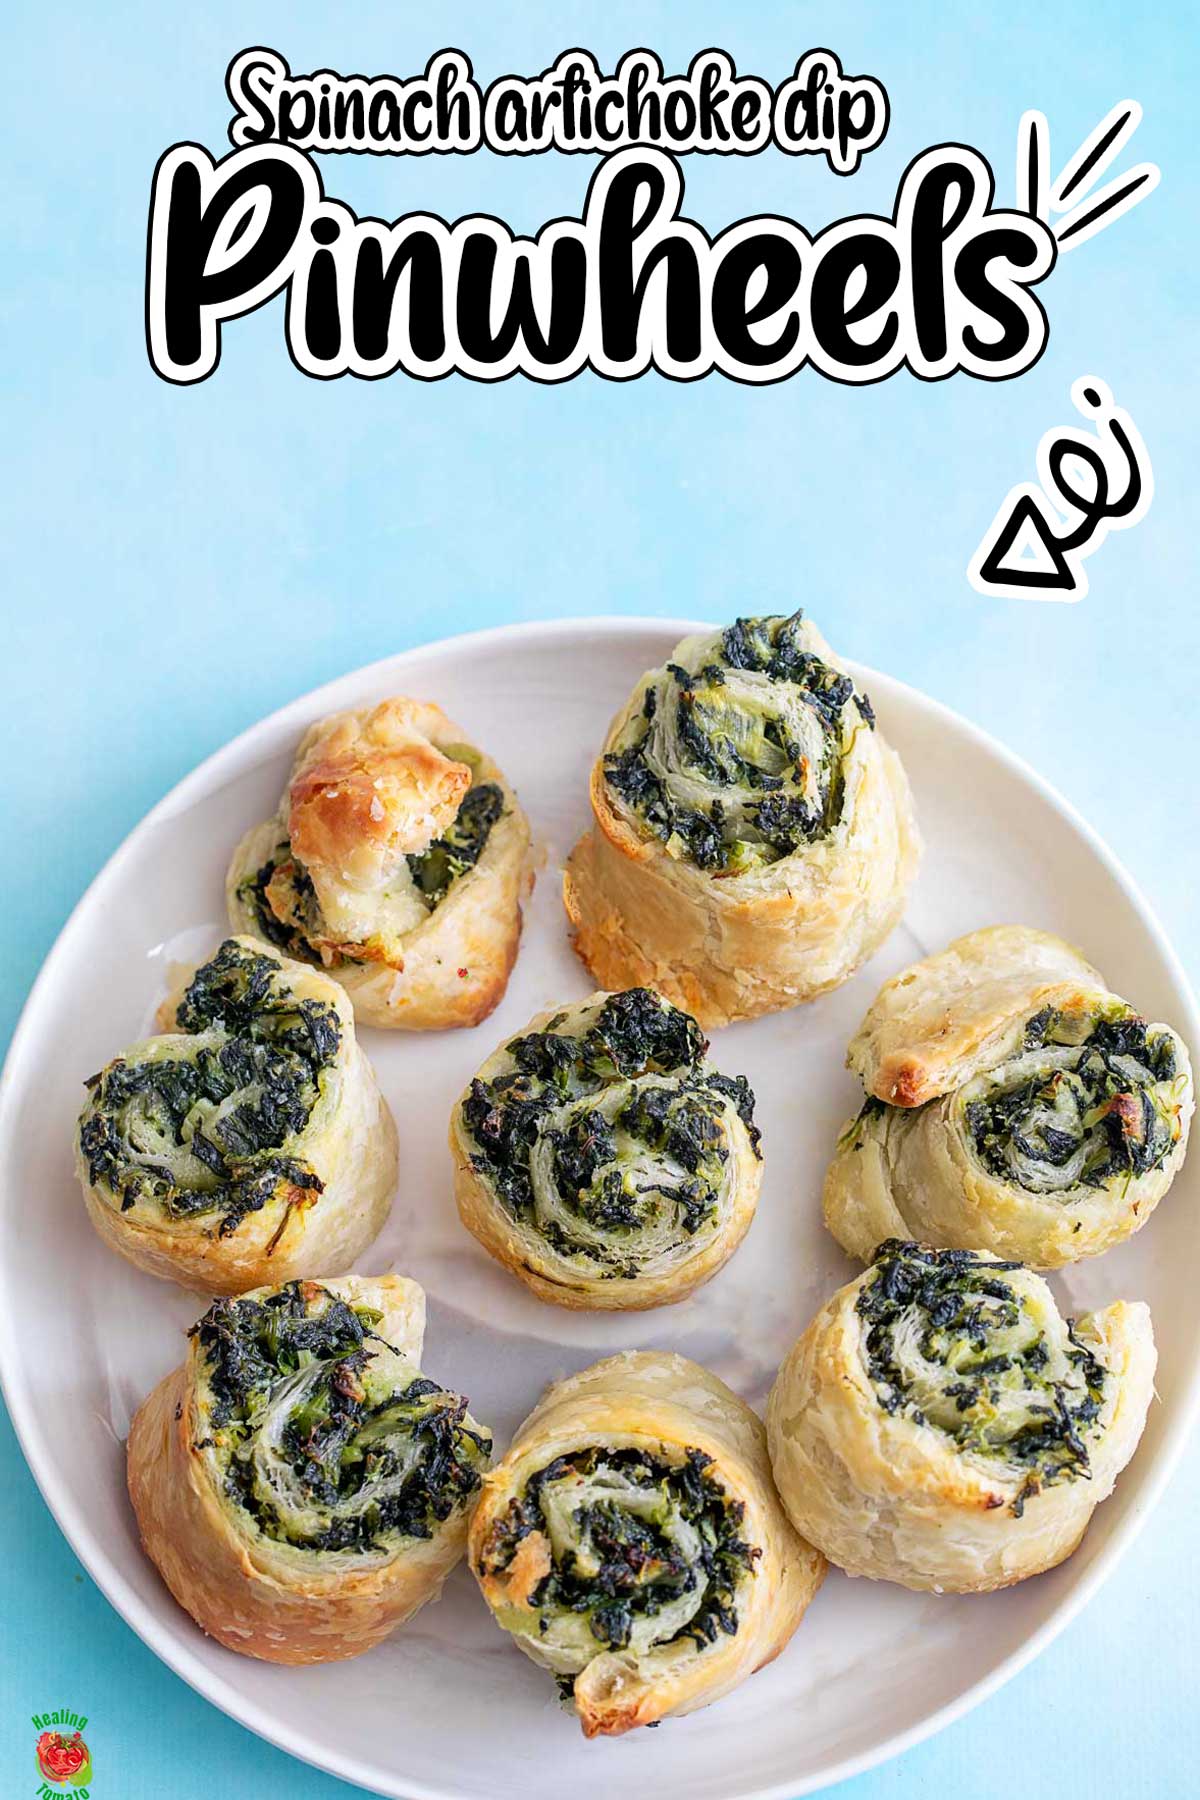 Top view of 8 puff pastry pinwheels on a white plate and a blue background